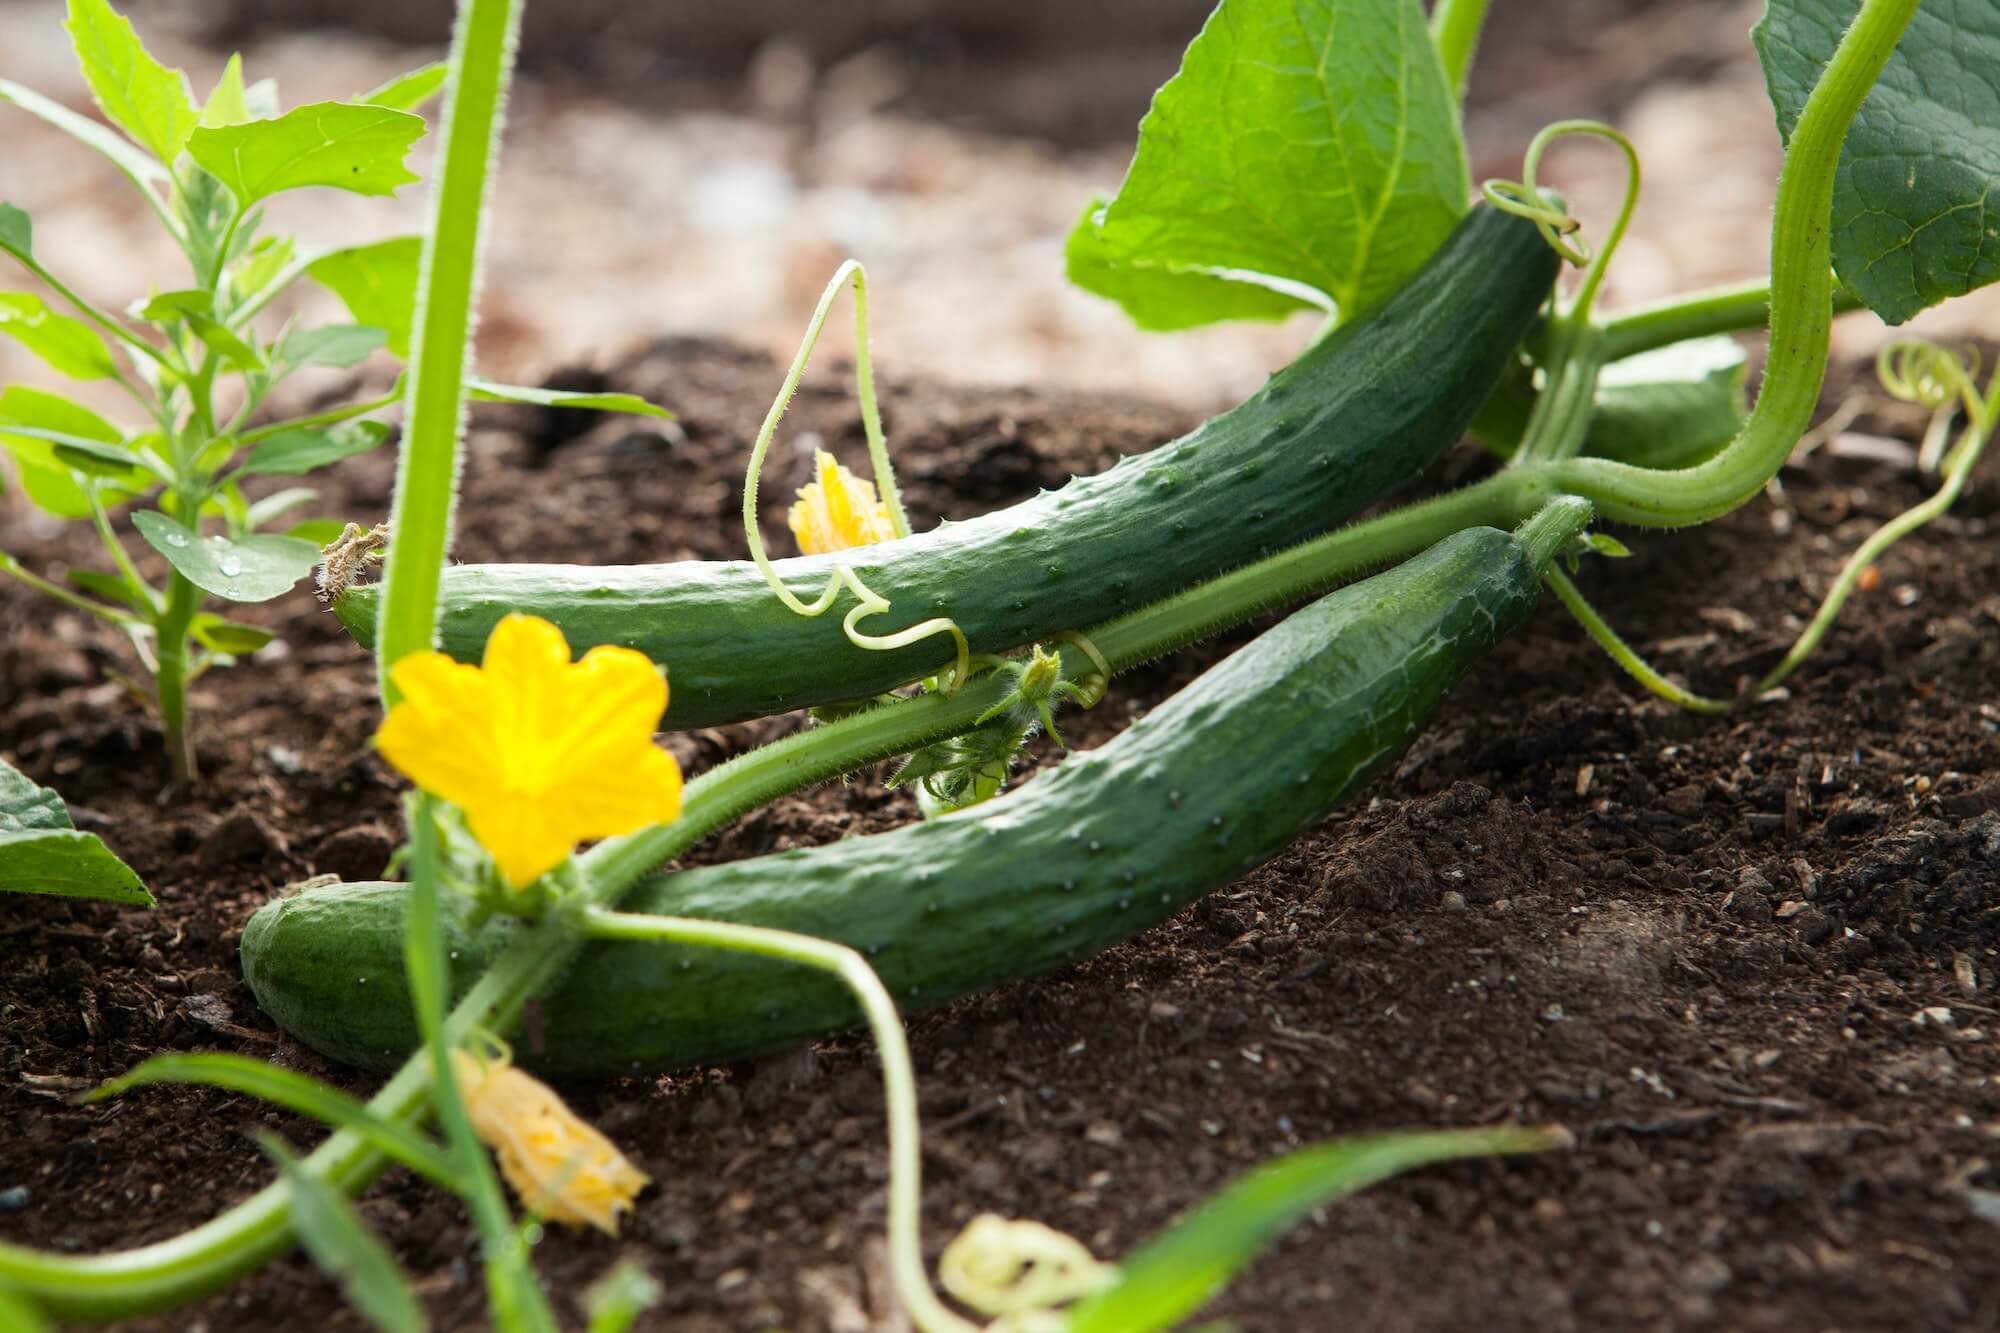 Cucumber seeds grown to full cucumbers in a field